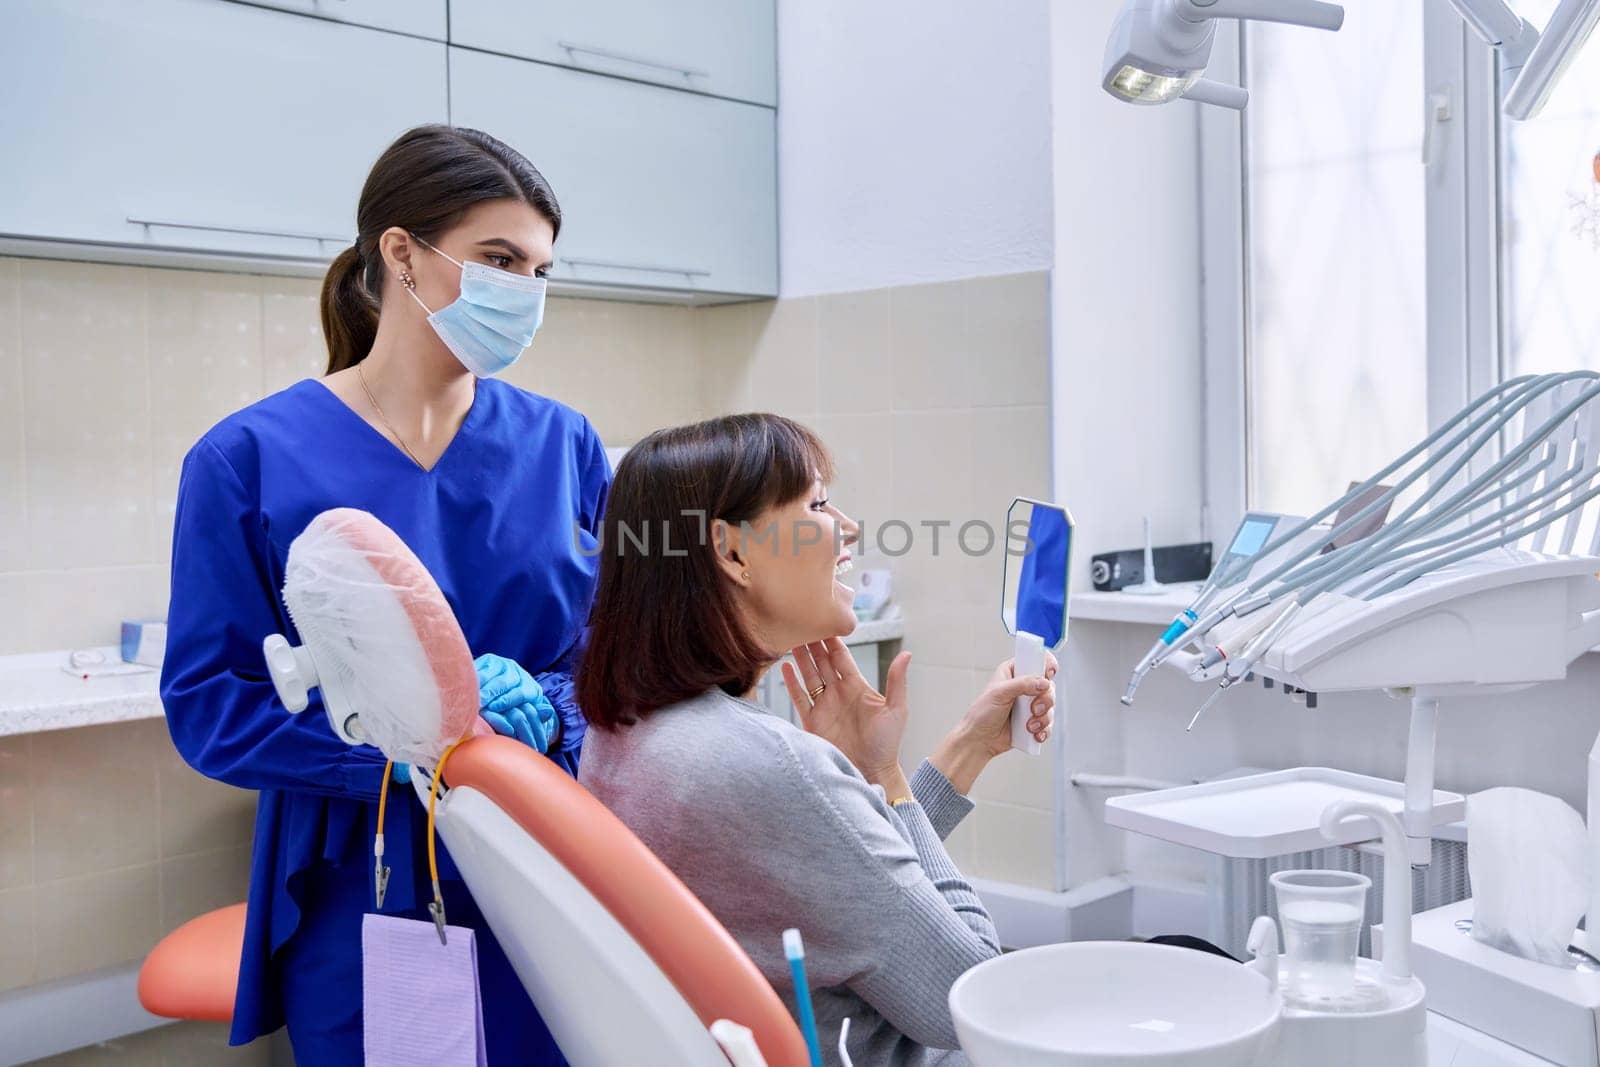 Dentist's office, woman patient looking at her teeth in the mirror by VH-studio